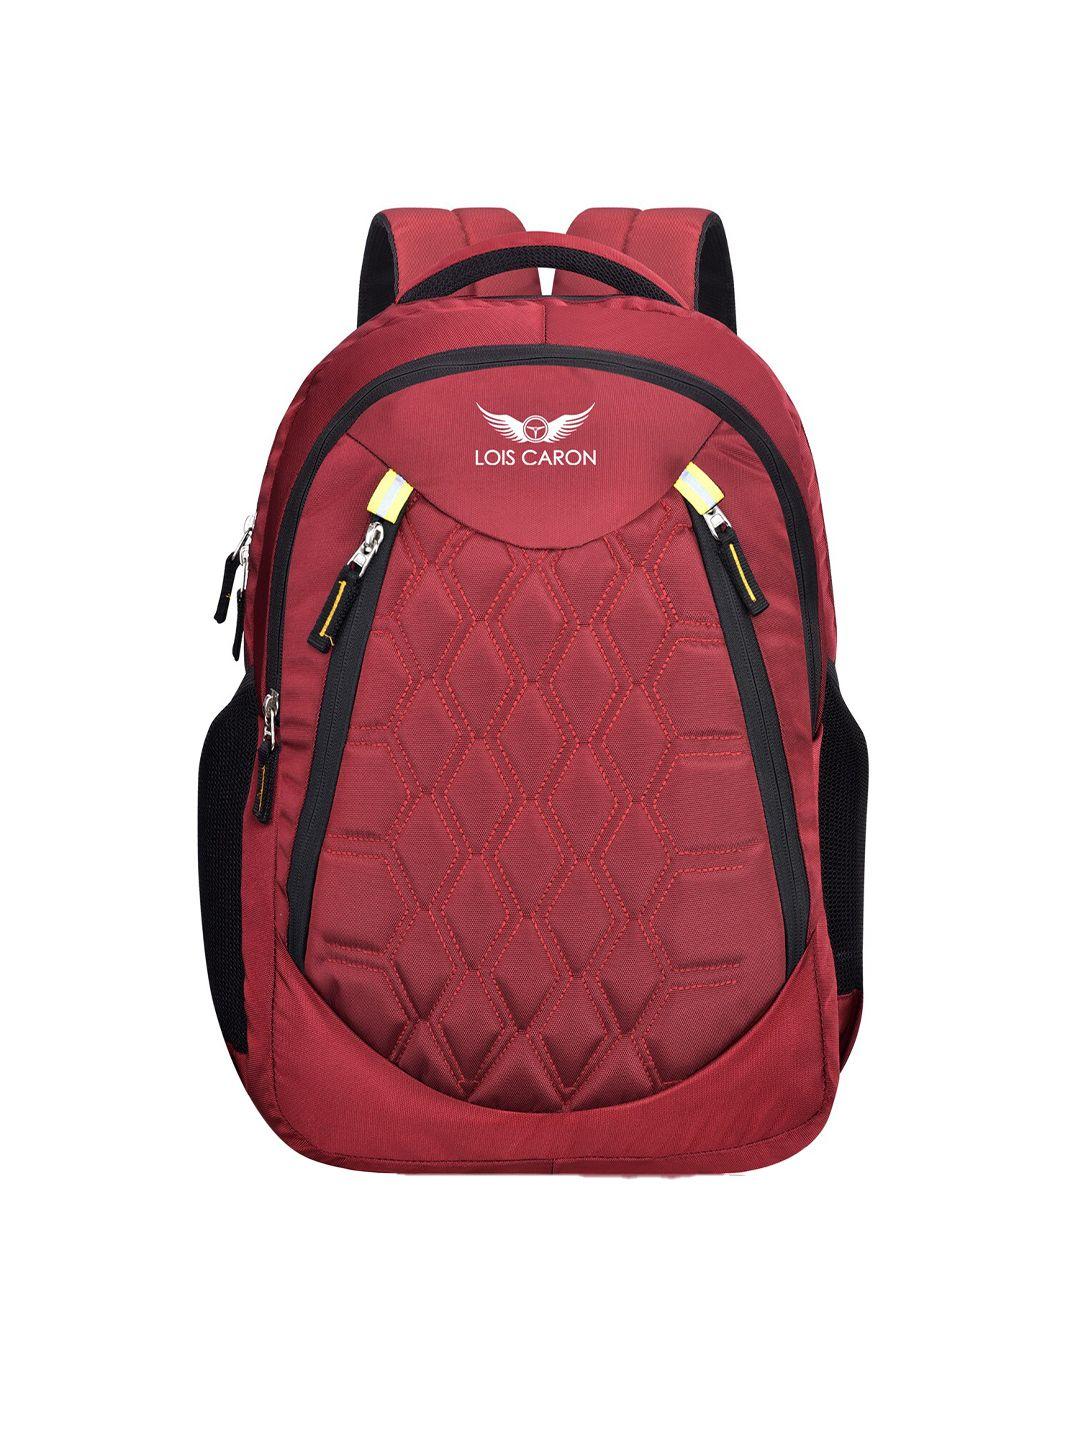 lois caron unisex red & black 18 inch backpack